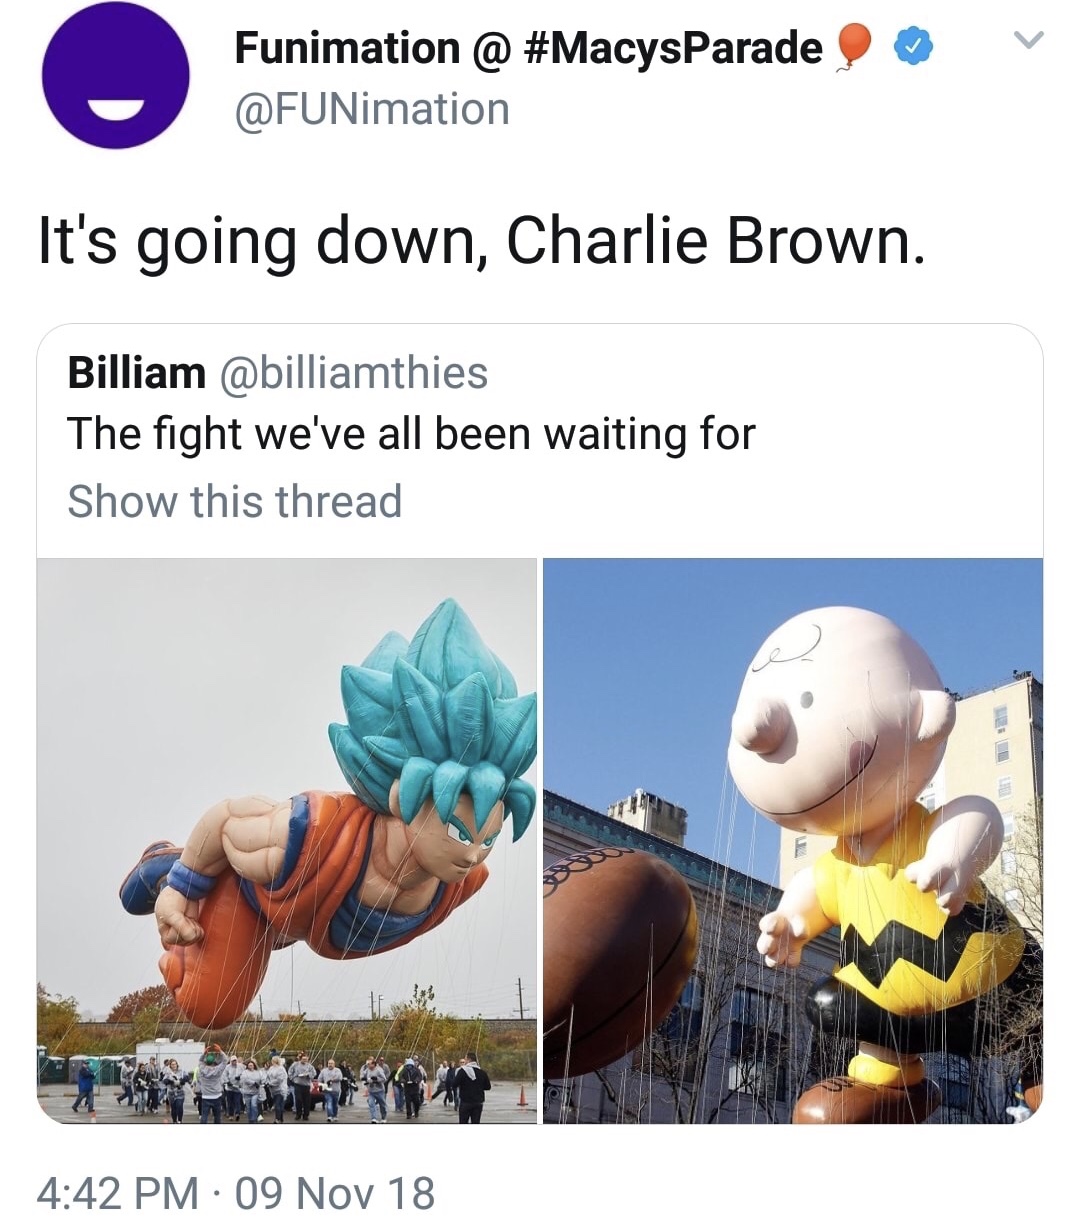 dank human behavior - Funimation @ It's going down, Charlie Brown. Billiam The fight we've all been waiting for Show this thread 09 Nov 18